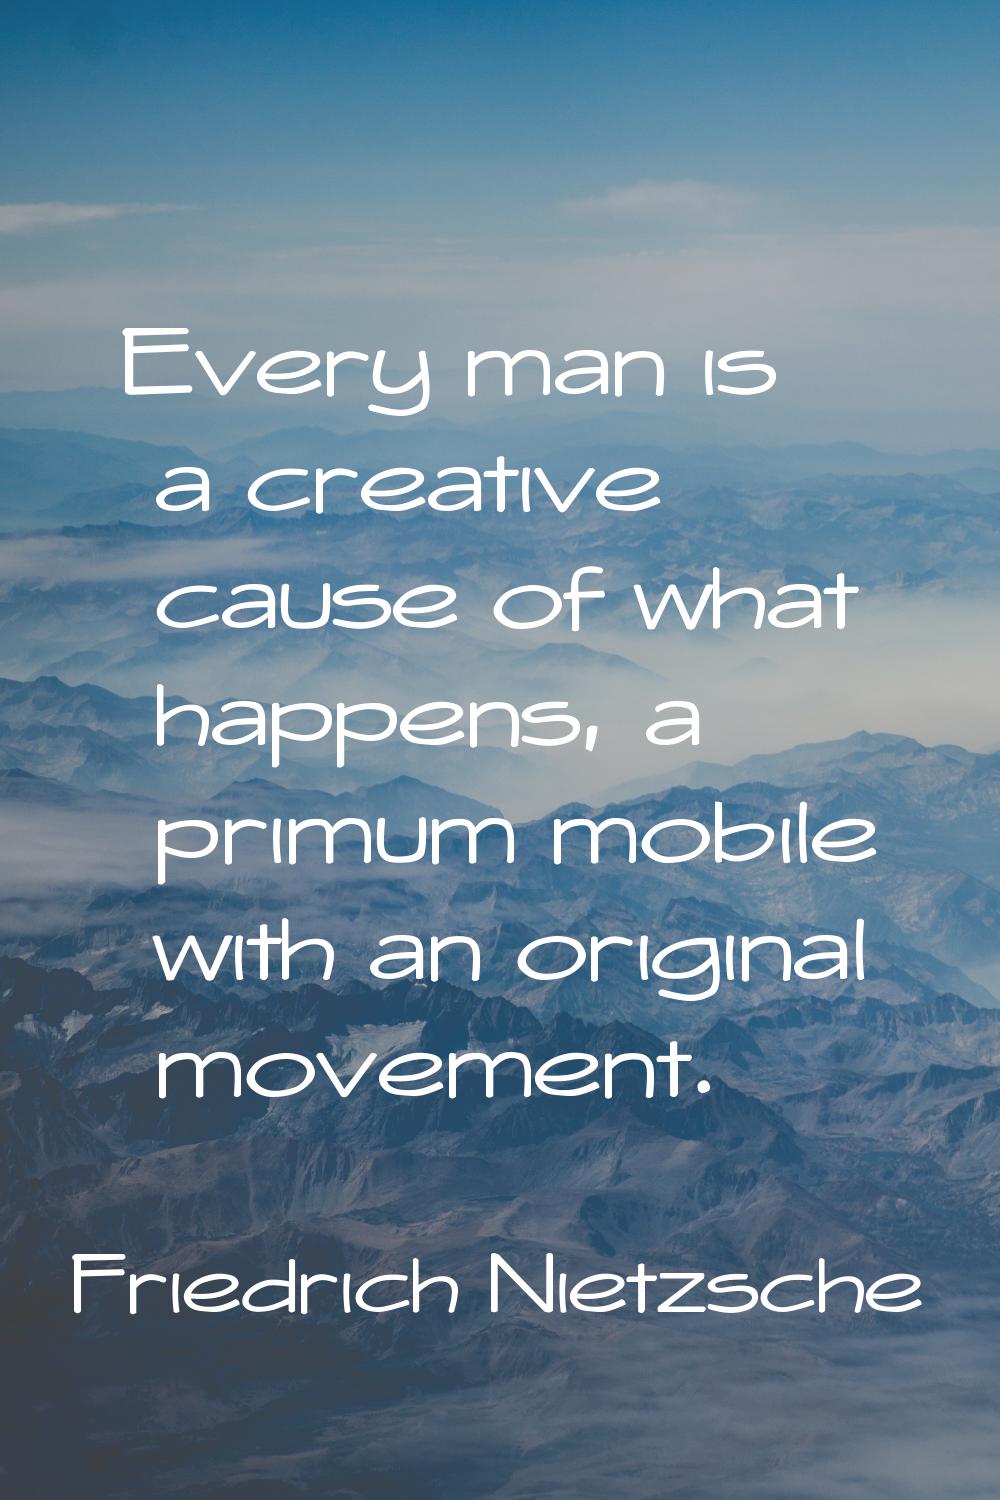 Every man is a creative cause of what happens, a primum mobile with an original movement.